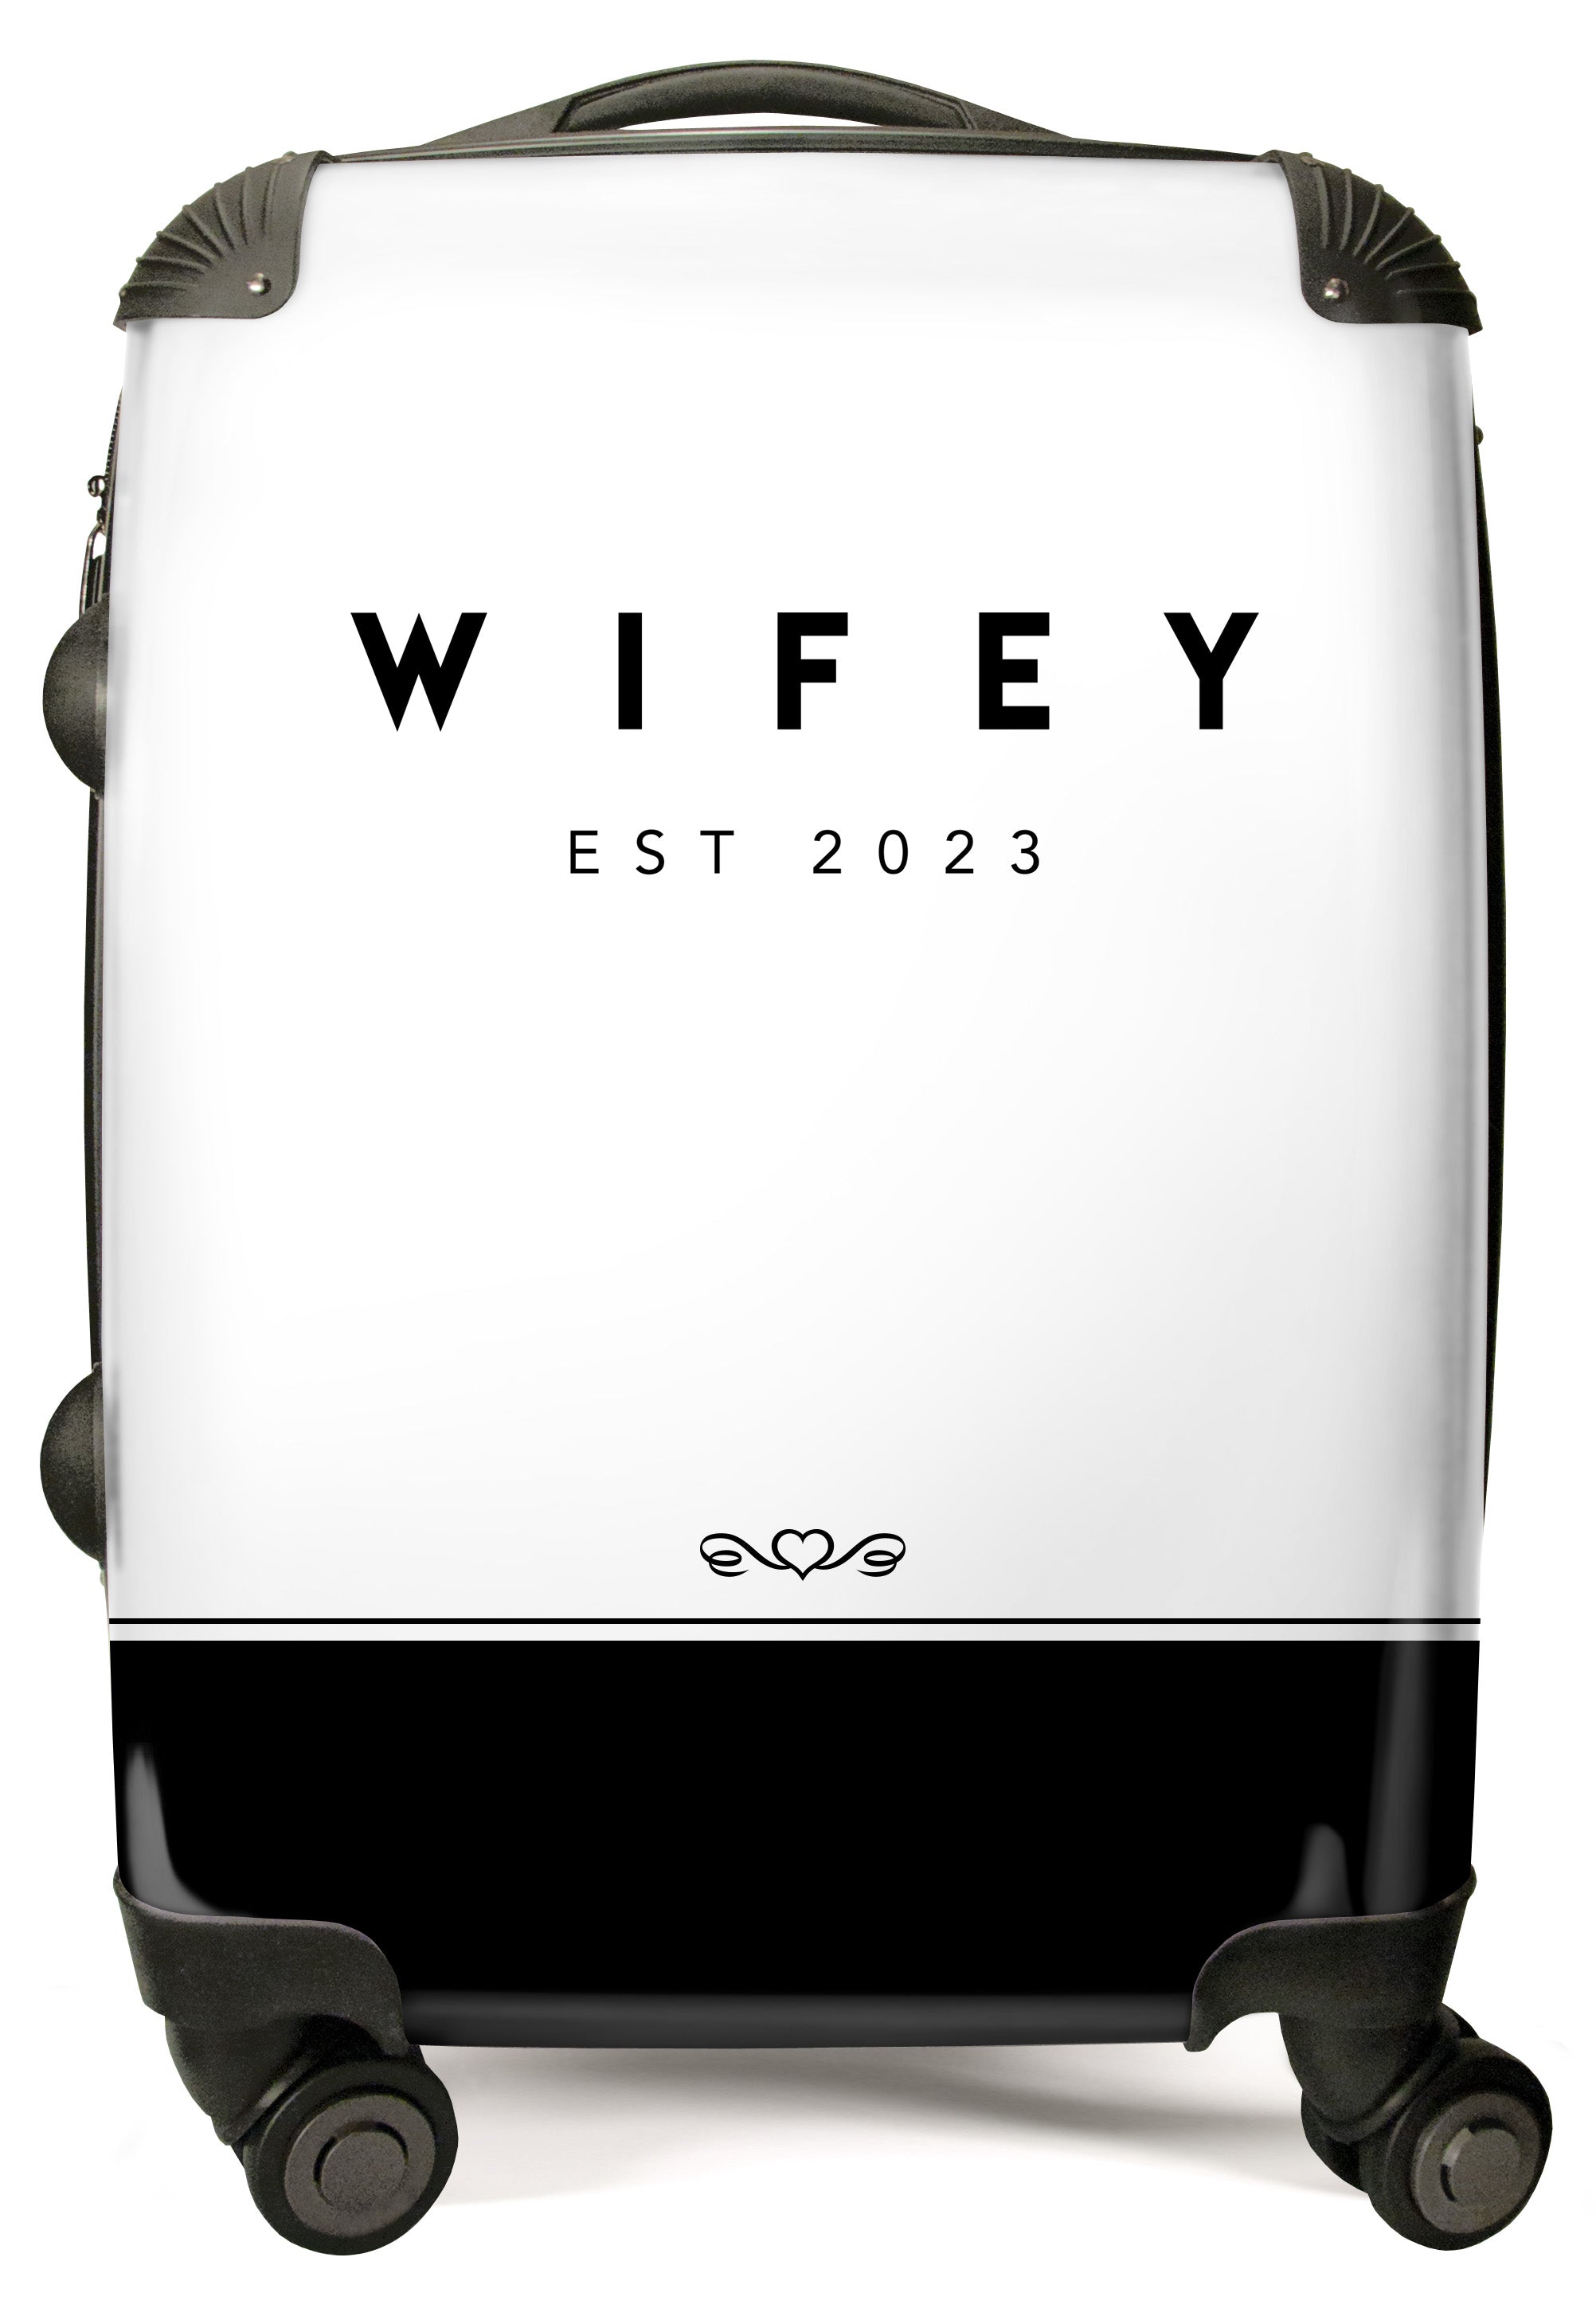 PERSONALIZED WHITE AND BLACK WIFEY PRINT LUGGAGE